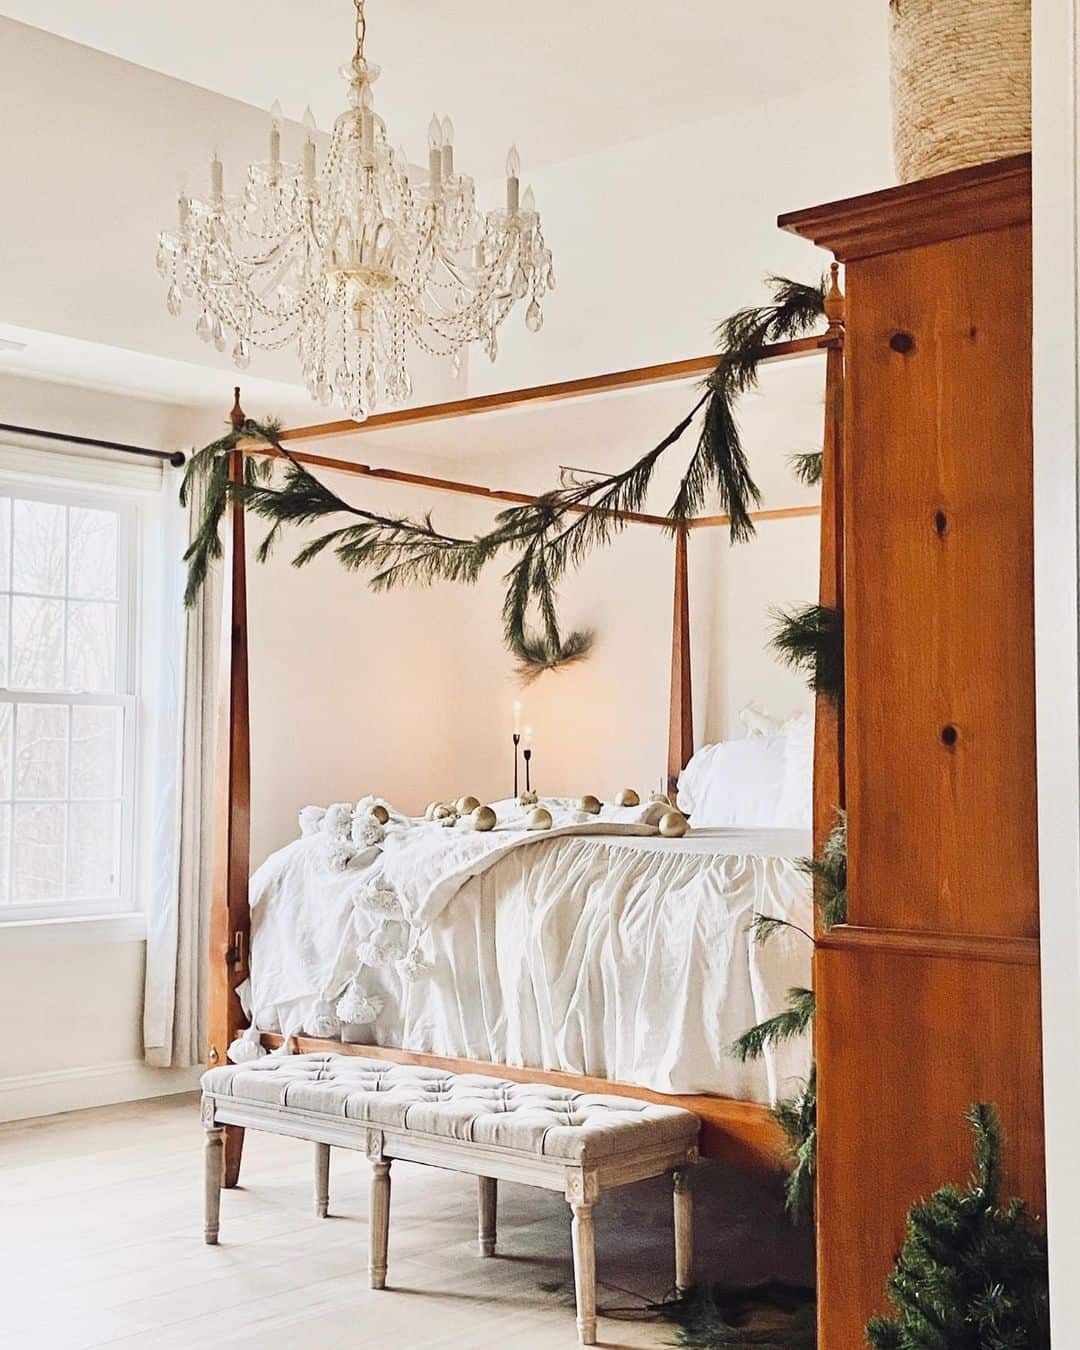 Green Garland Draped Over Four-Poster Bed - Soul & Lane